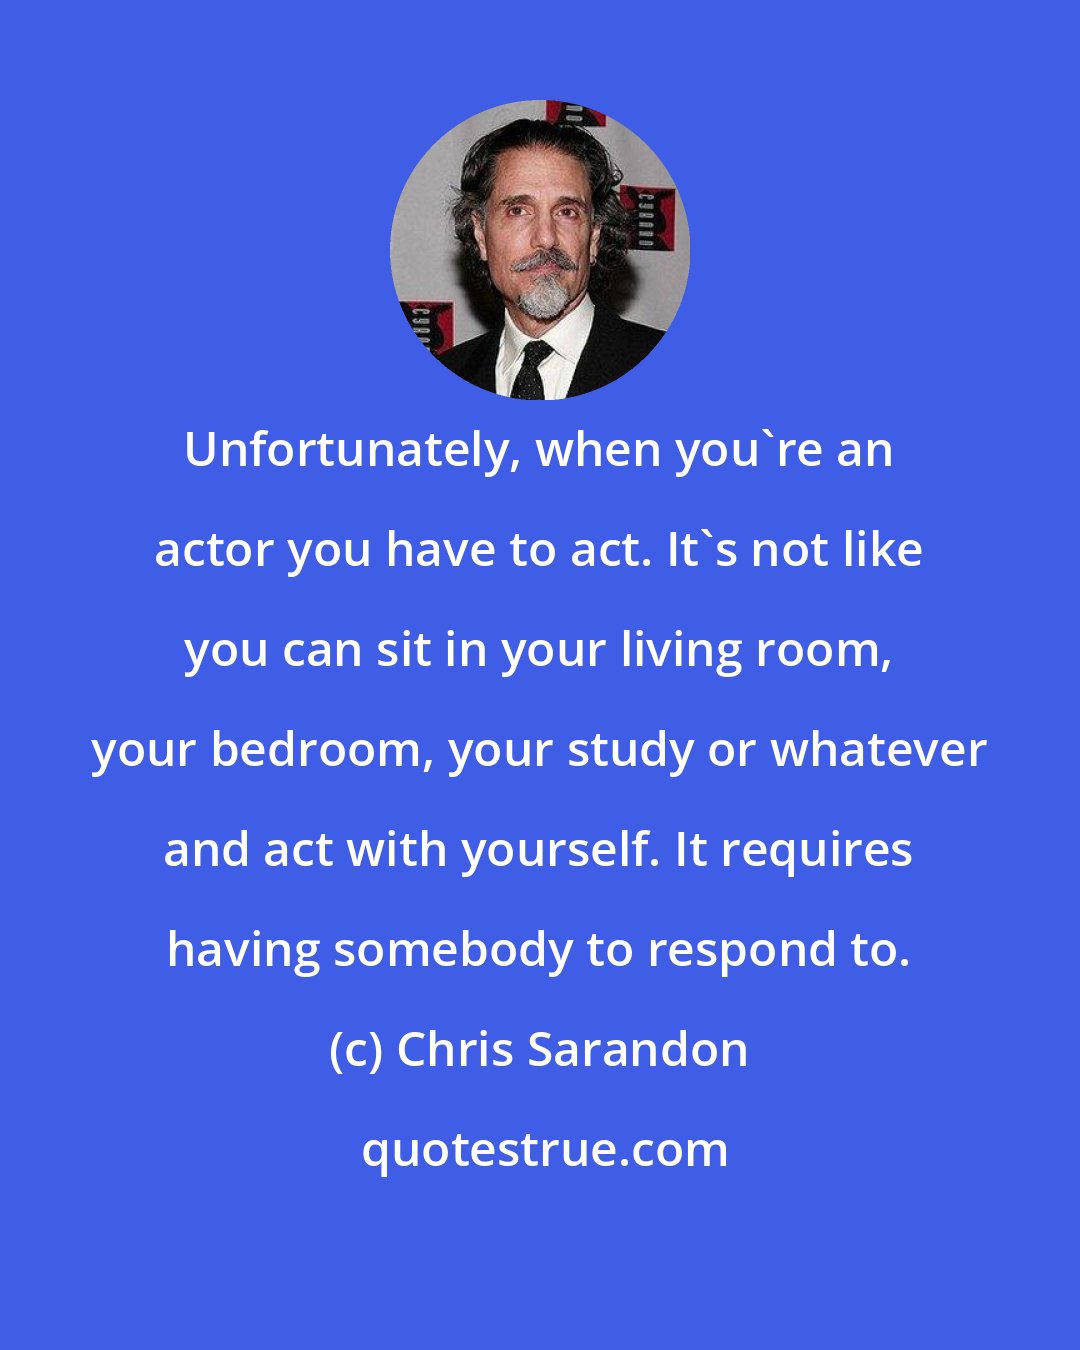 Chris Sarandon: Unfortunately, when you're an actor you have to act. It's not like you can sit in your living room, your bedroom, your study or whatever and act with yourself. It requires having somebody to respond to.